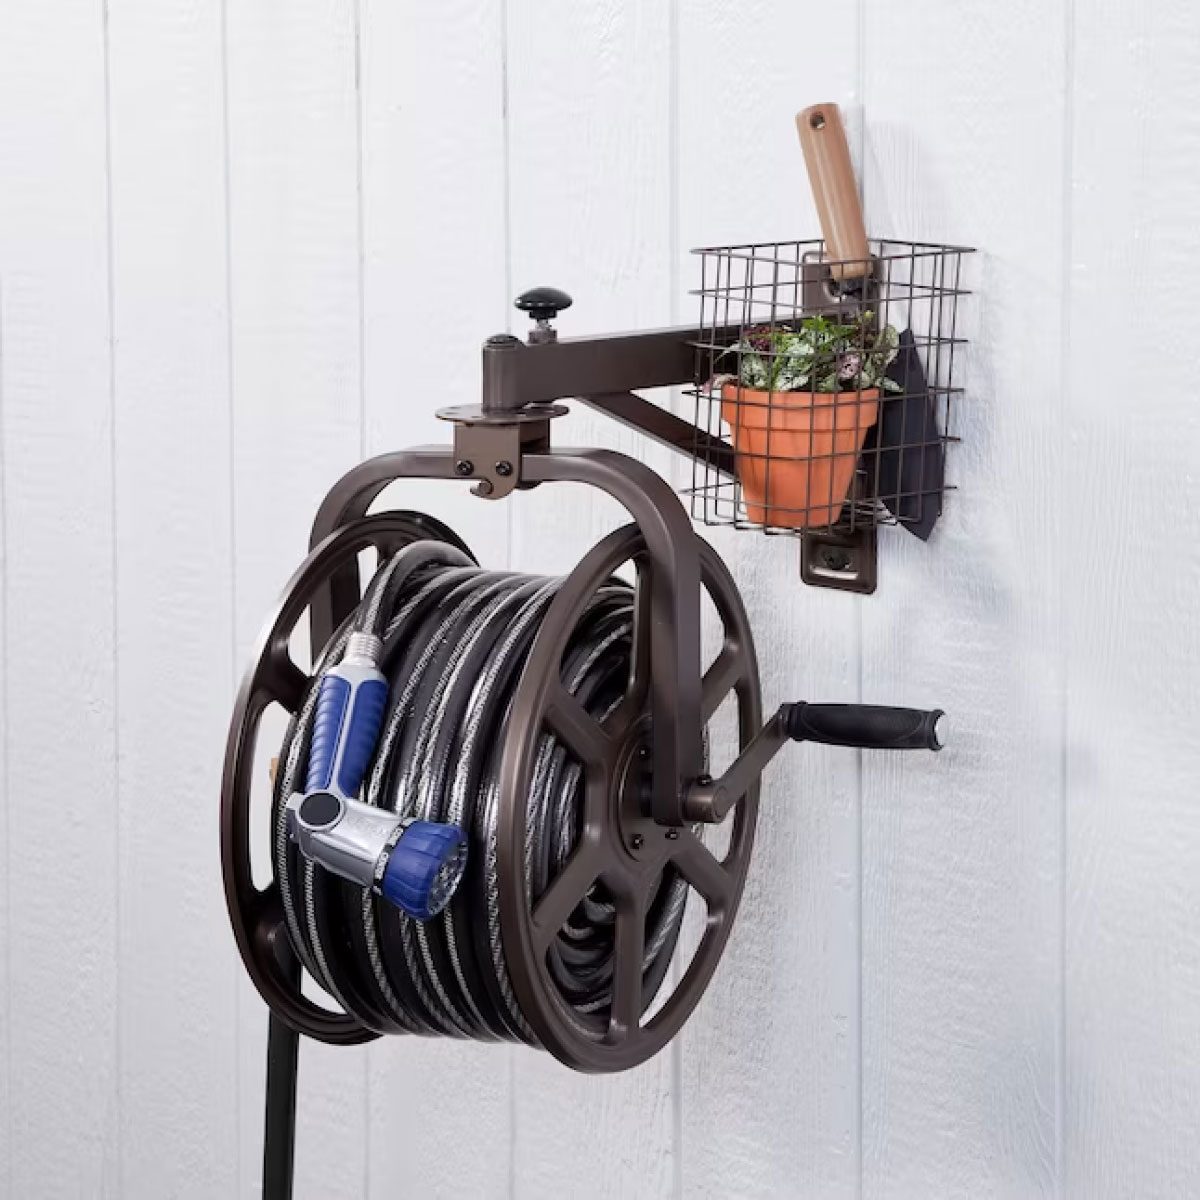 Stainless Steel Wall Mounted Garden Hose Reels & Storage Equipment